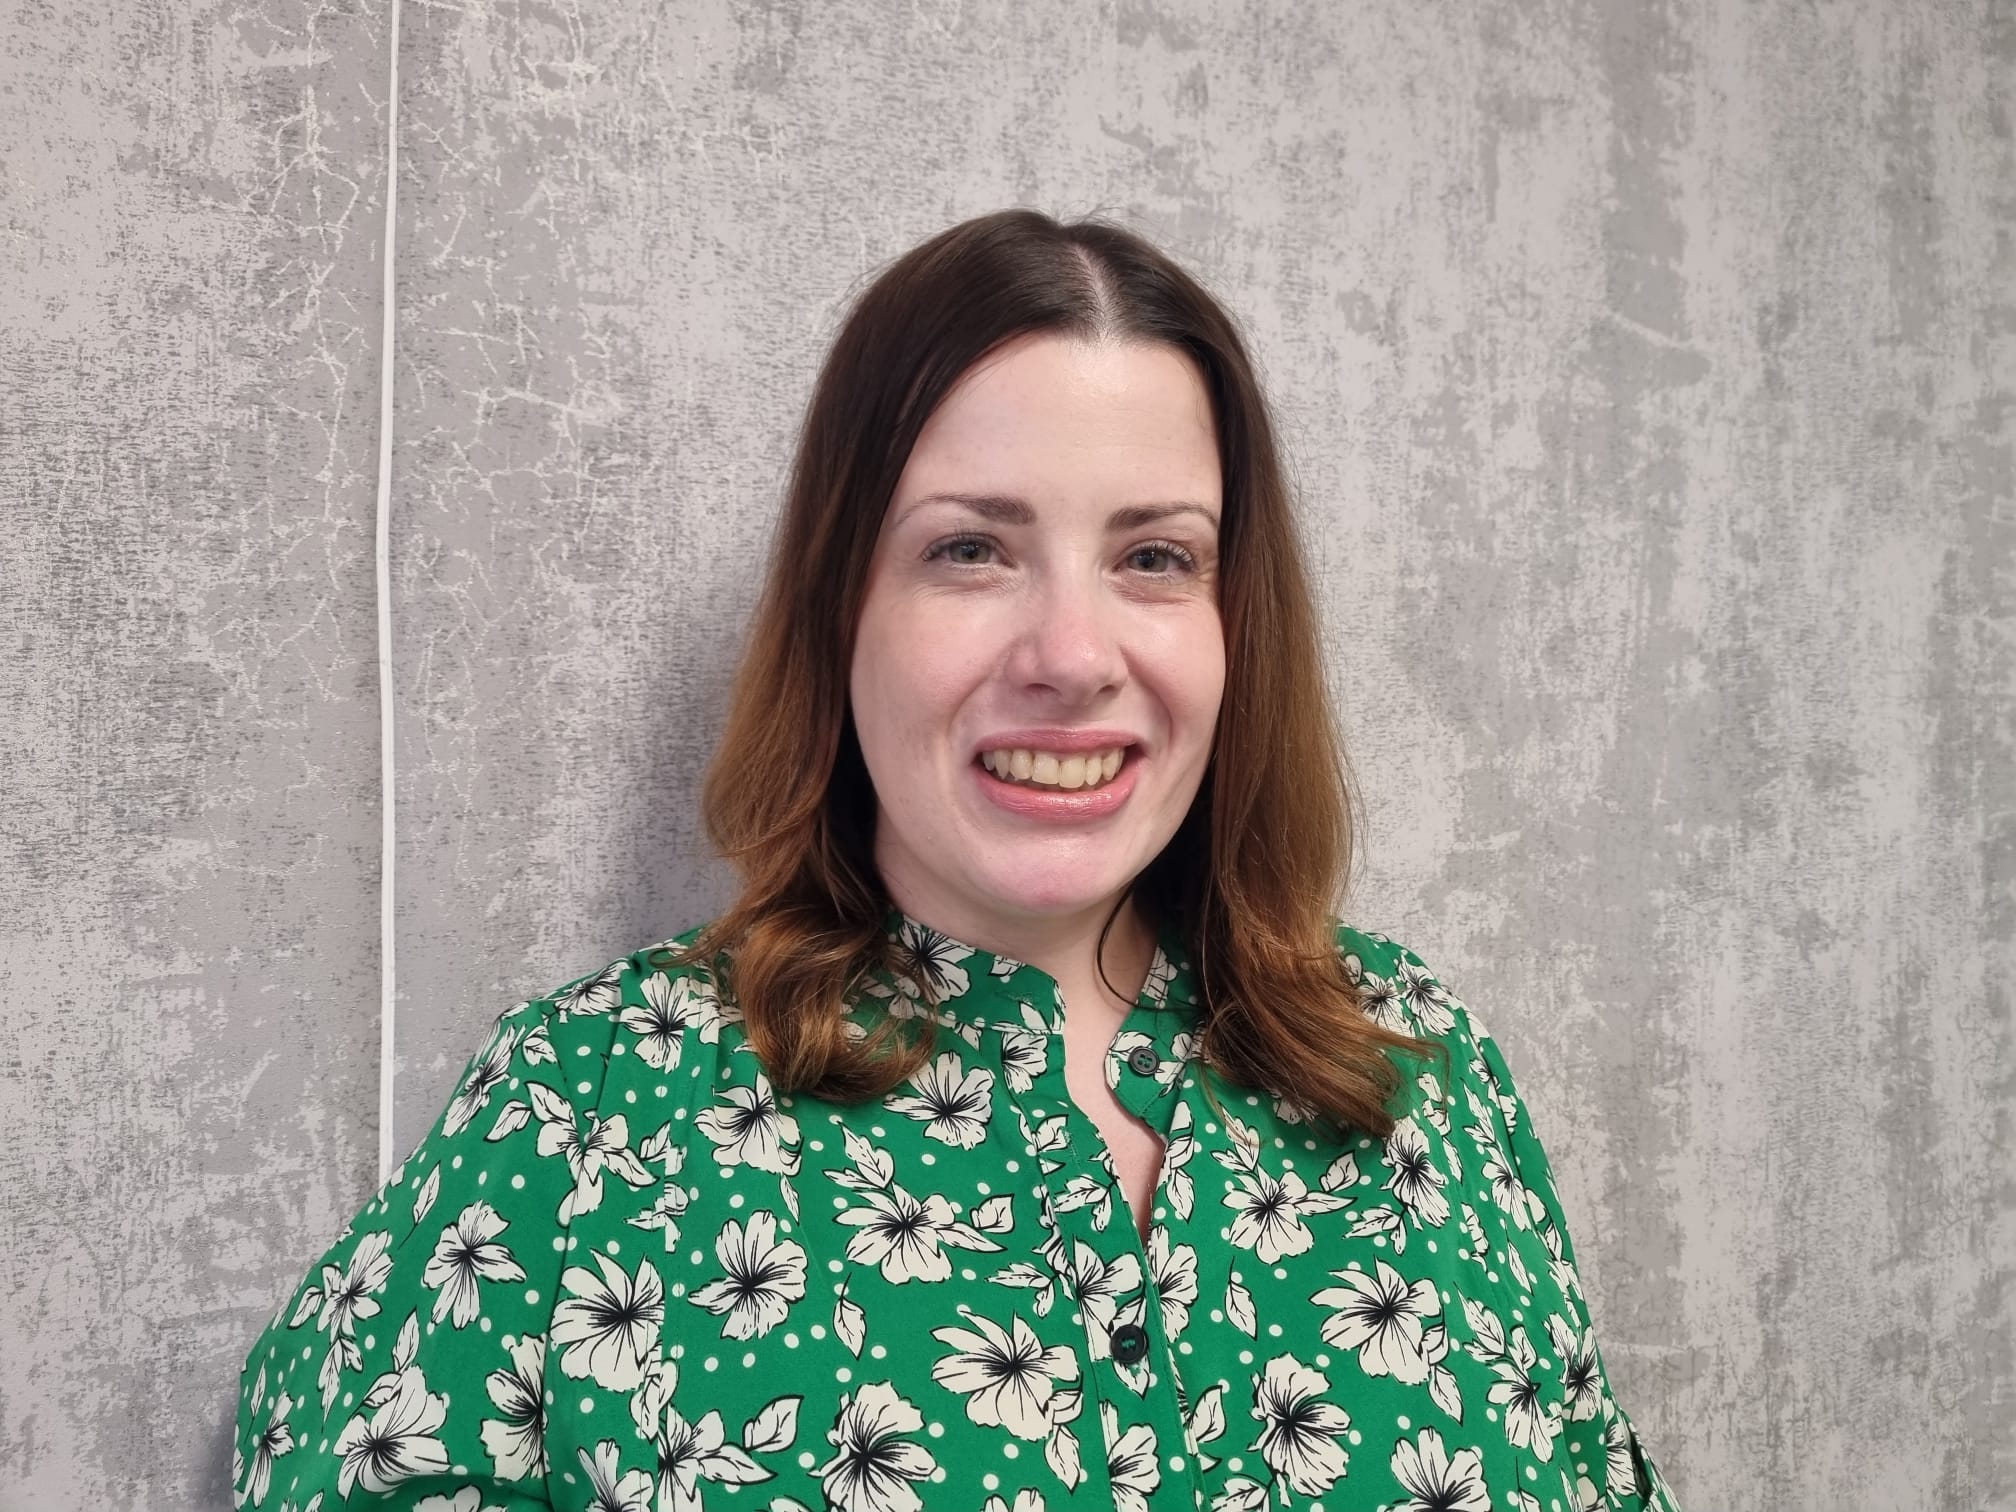 Federation of Small Businesses appoints Stacey Dingwall as head of policy for Scotland